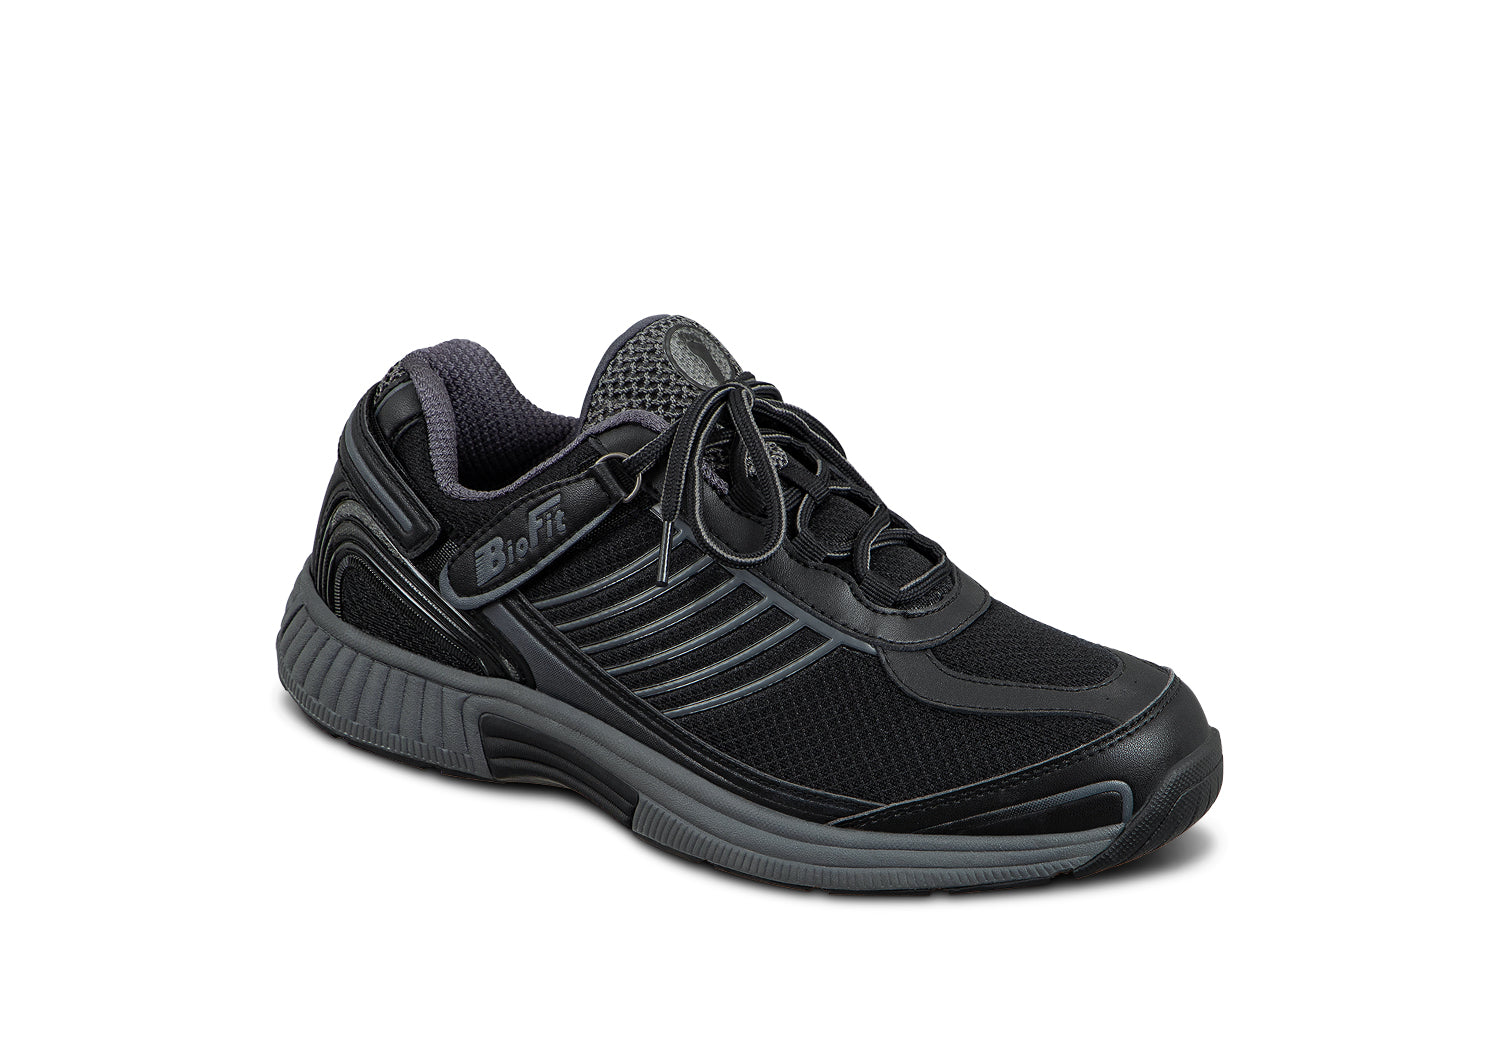 Who knew you could get Avia wide-width sneakers for under $30?